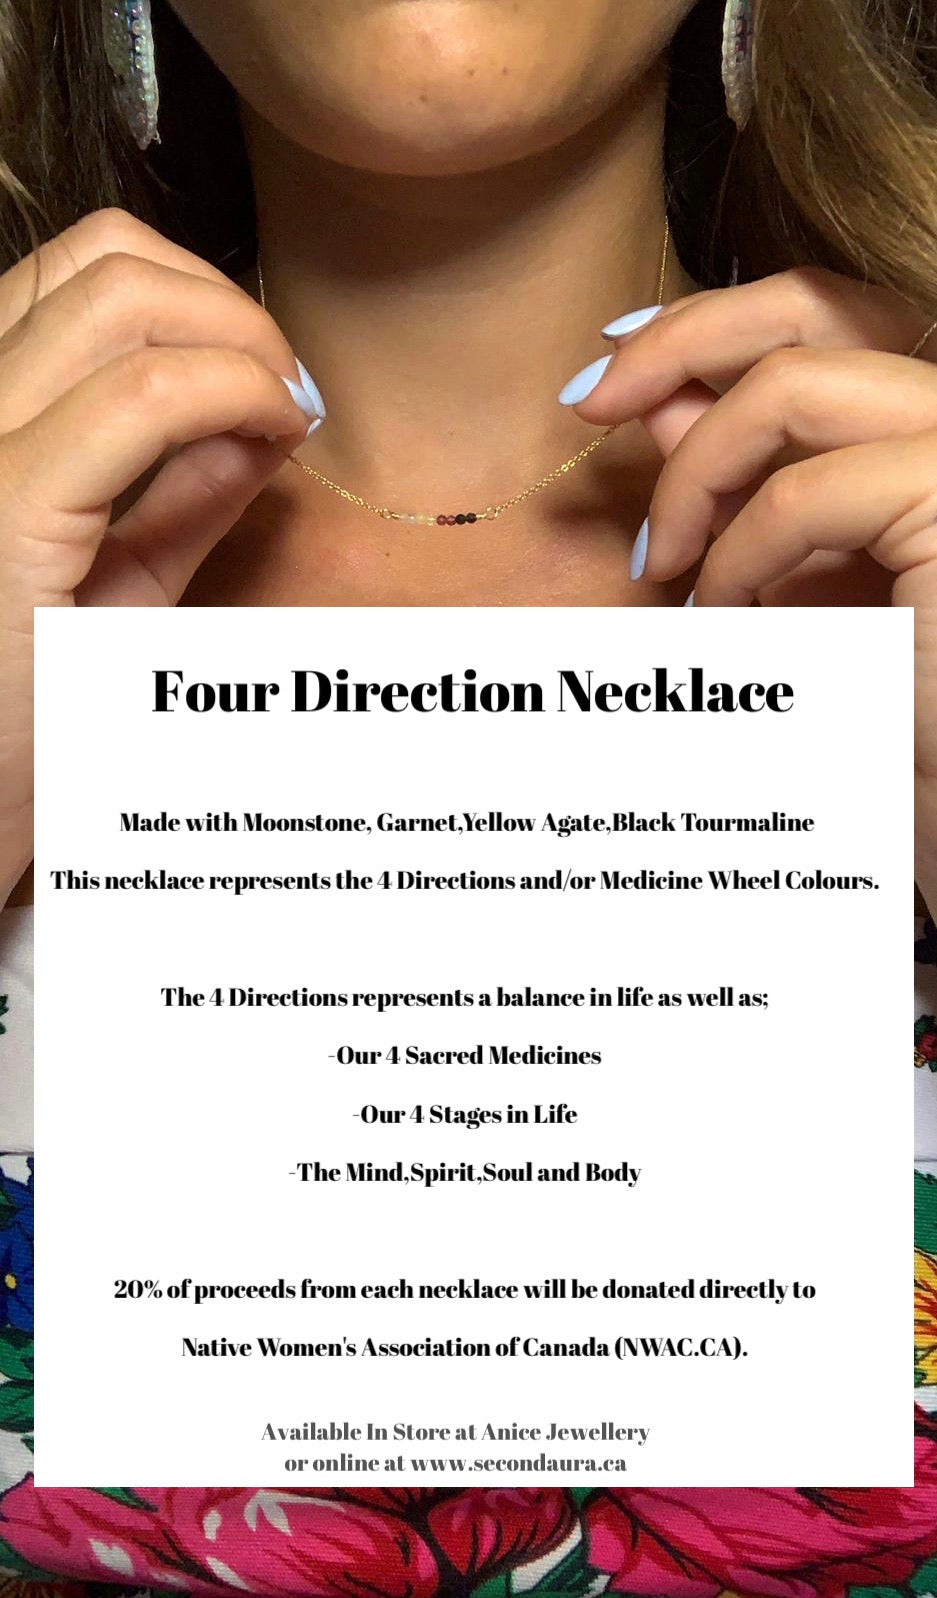 The Four Direction Necklace